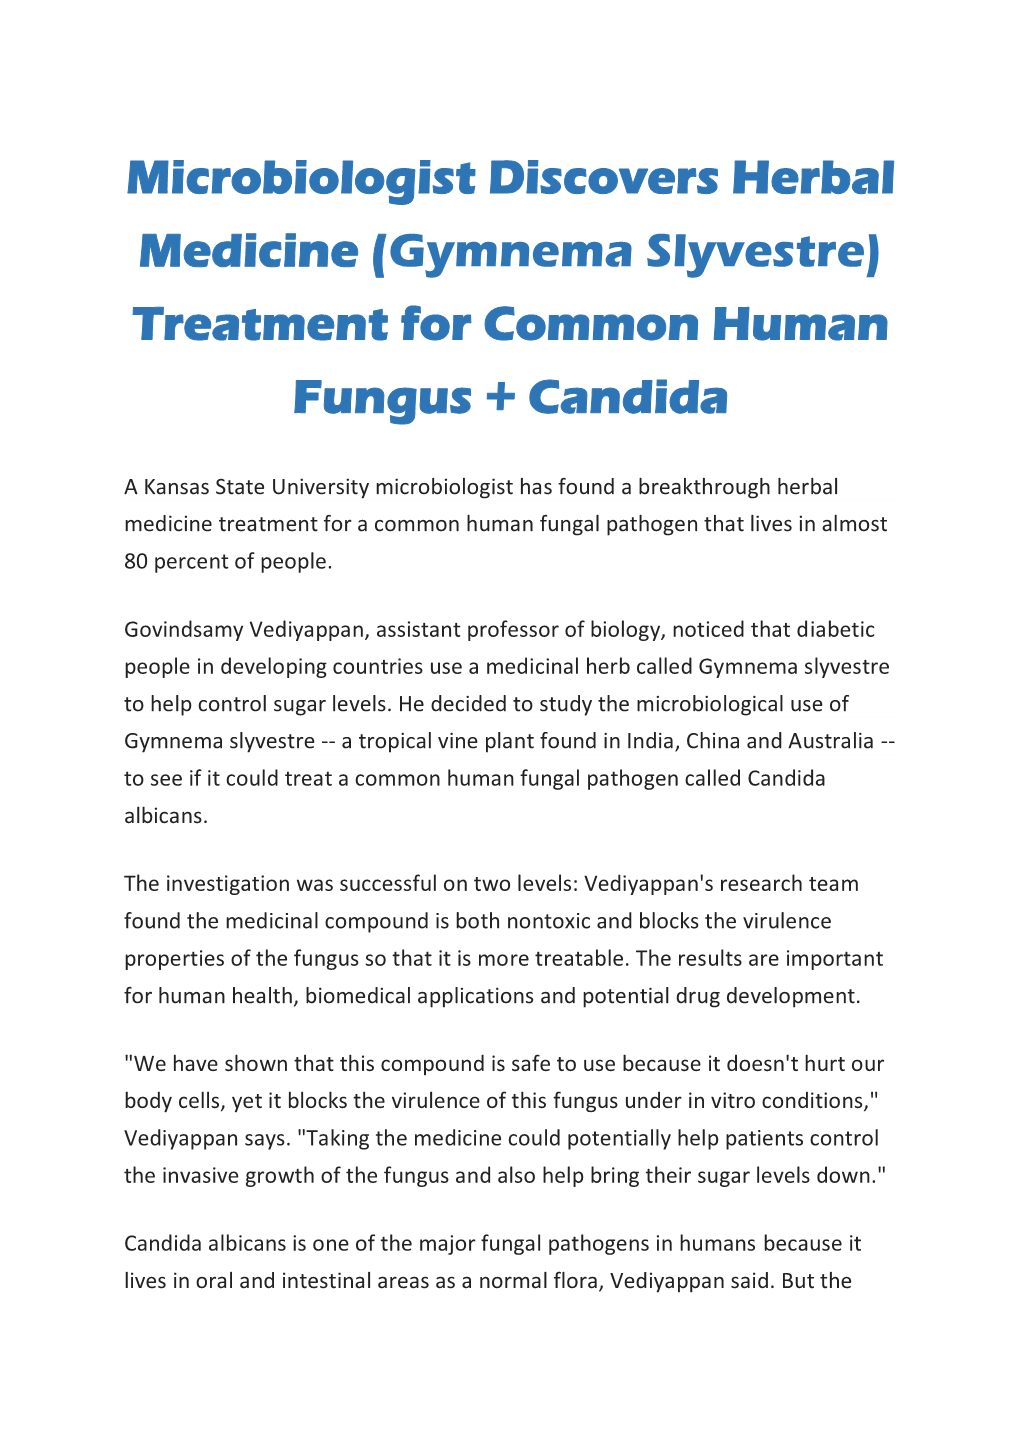 Microbiologist Discovers Herbal Medicine (Gymnema Slyvestre) Treatment for Common Human Fungus + Candida